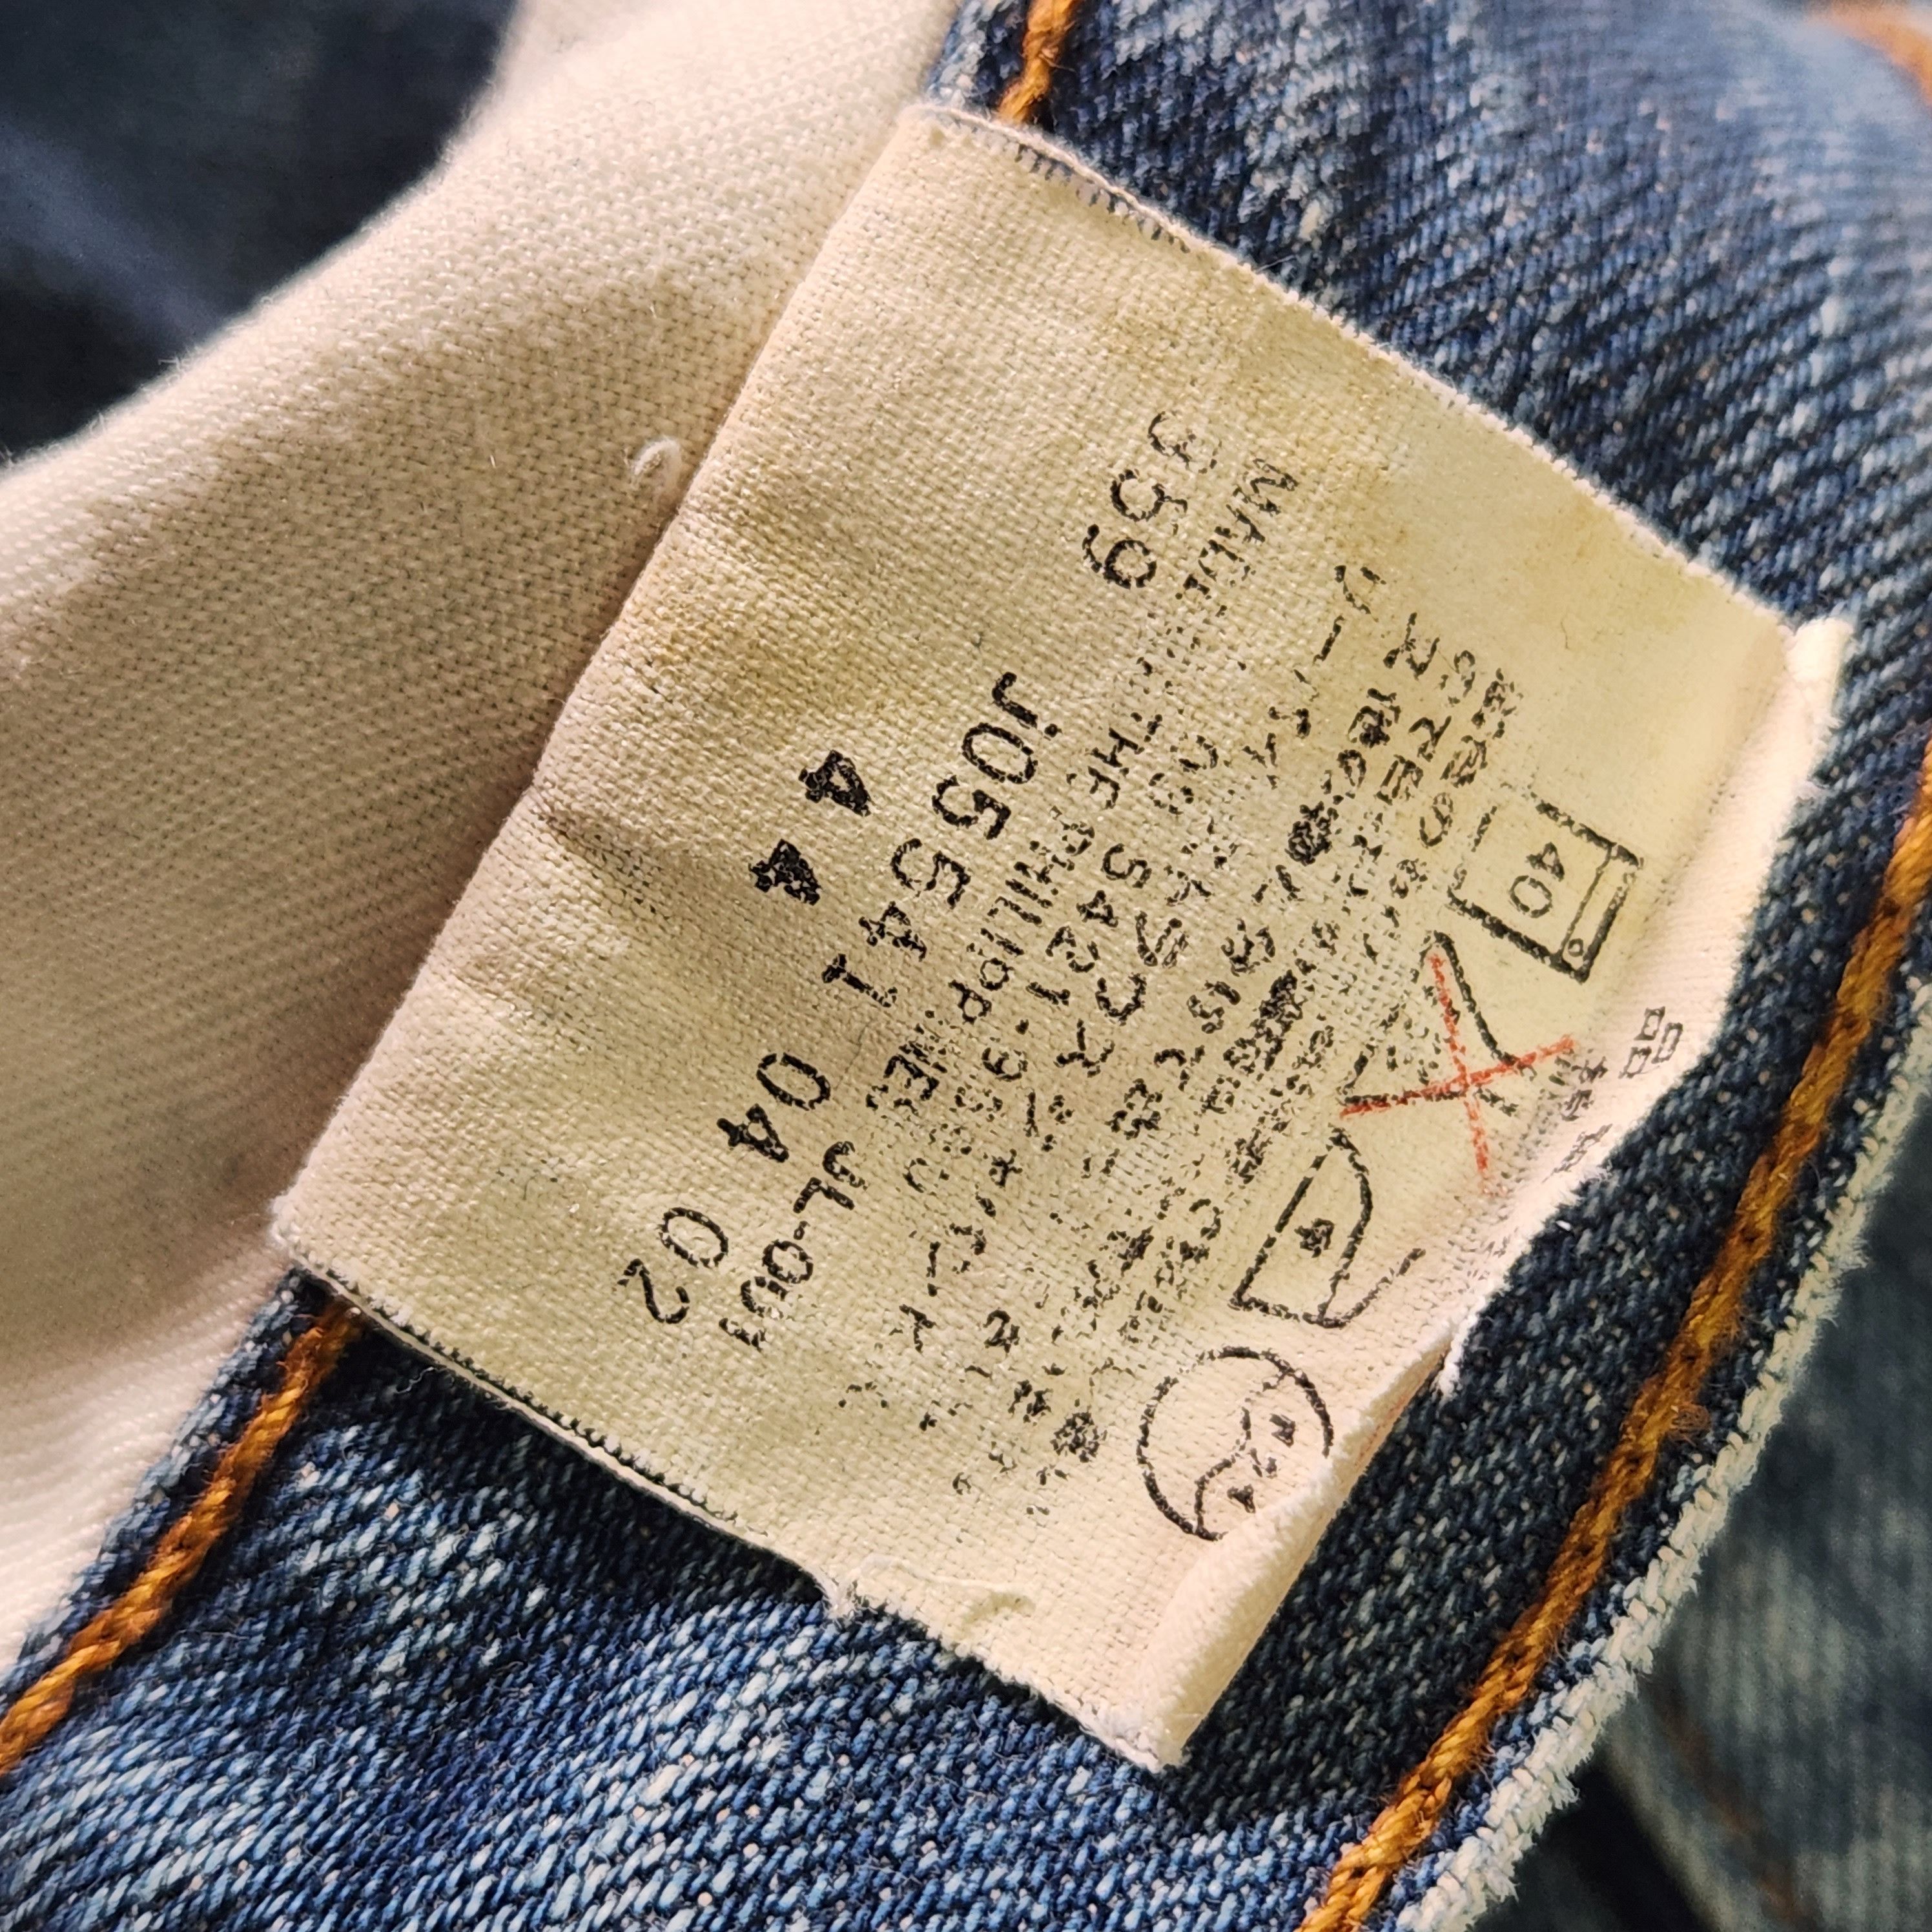 Levis 502 Vintage Distressed Ripped Denim Jeans Year 2002 - 10